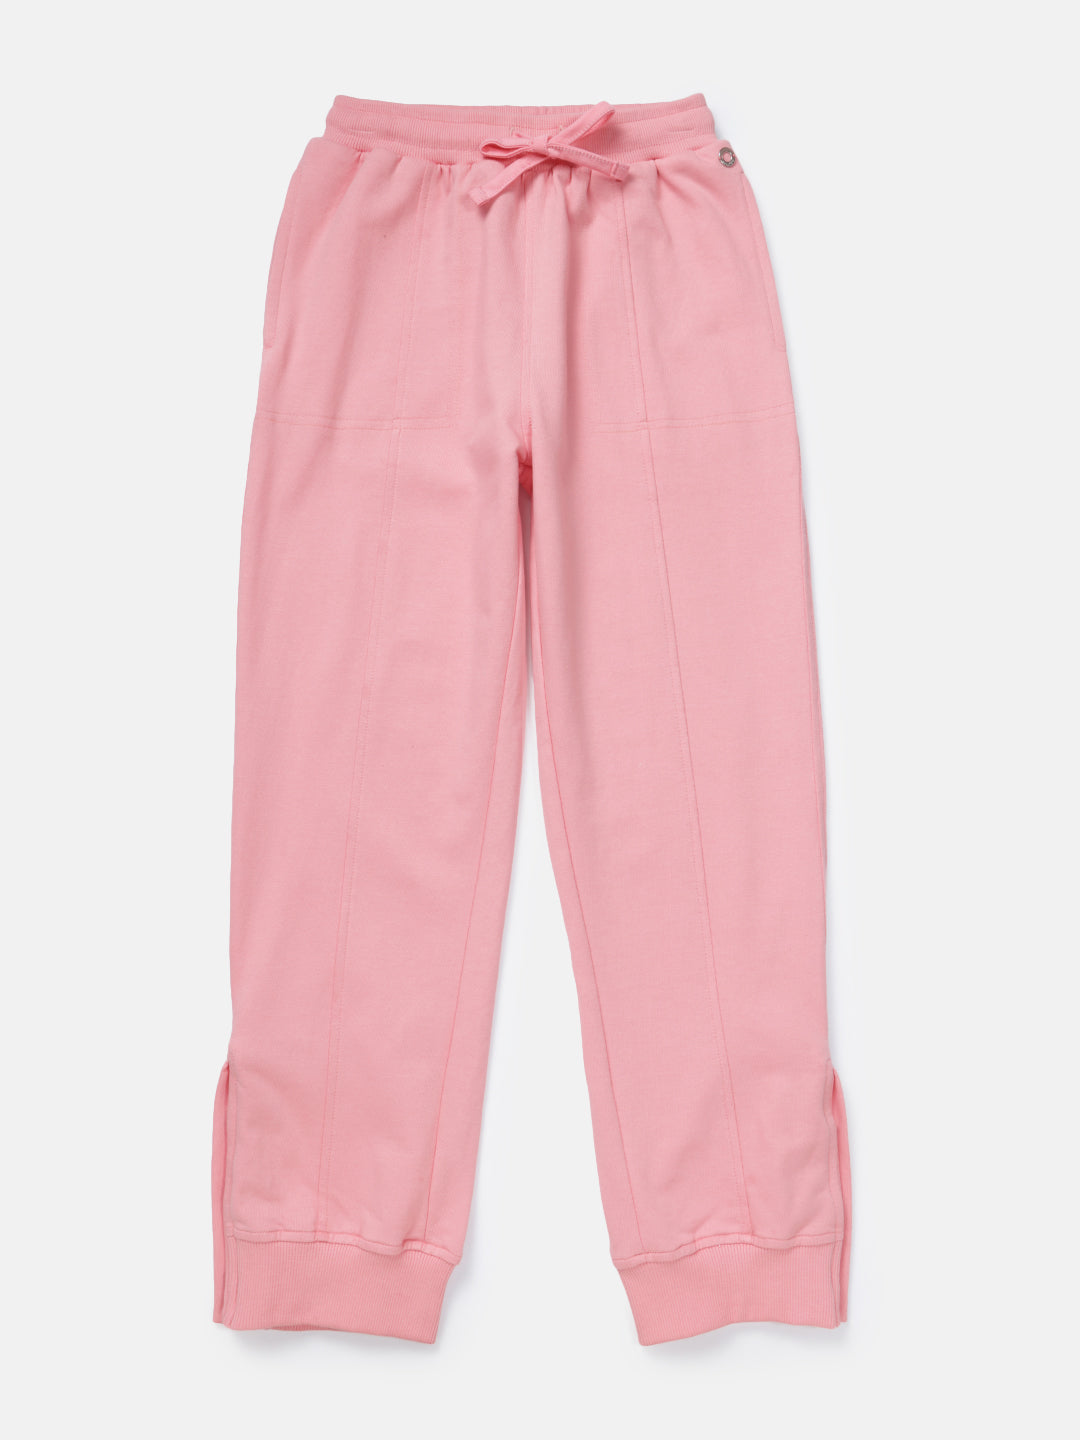 Girls Pink Cotton Solid Elasticated Track Pant